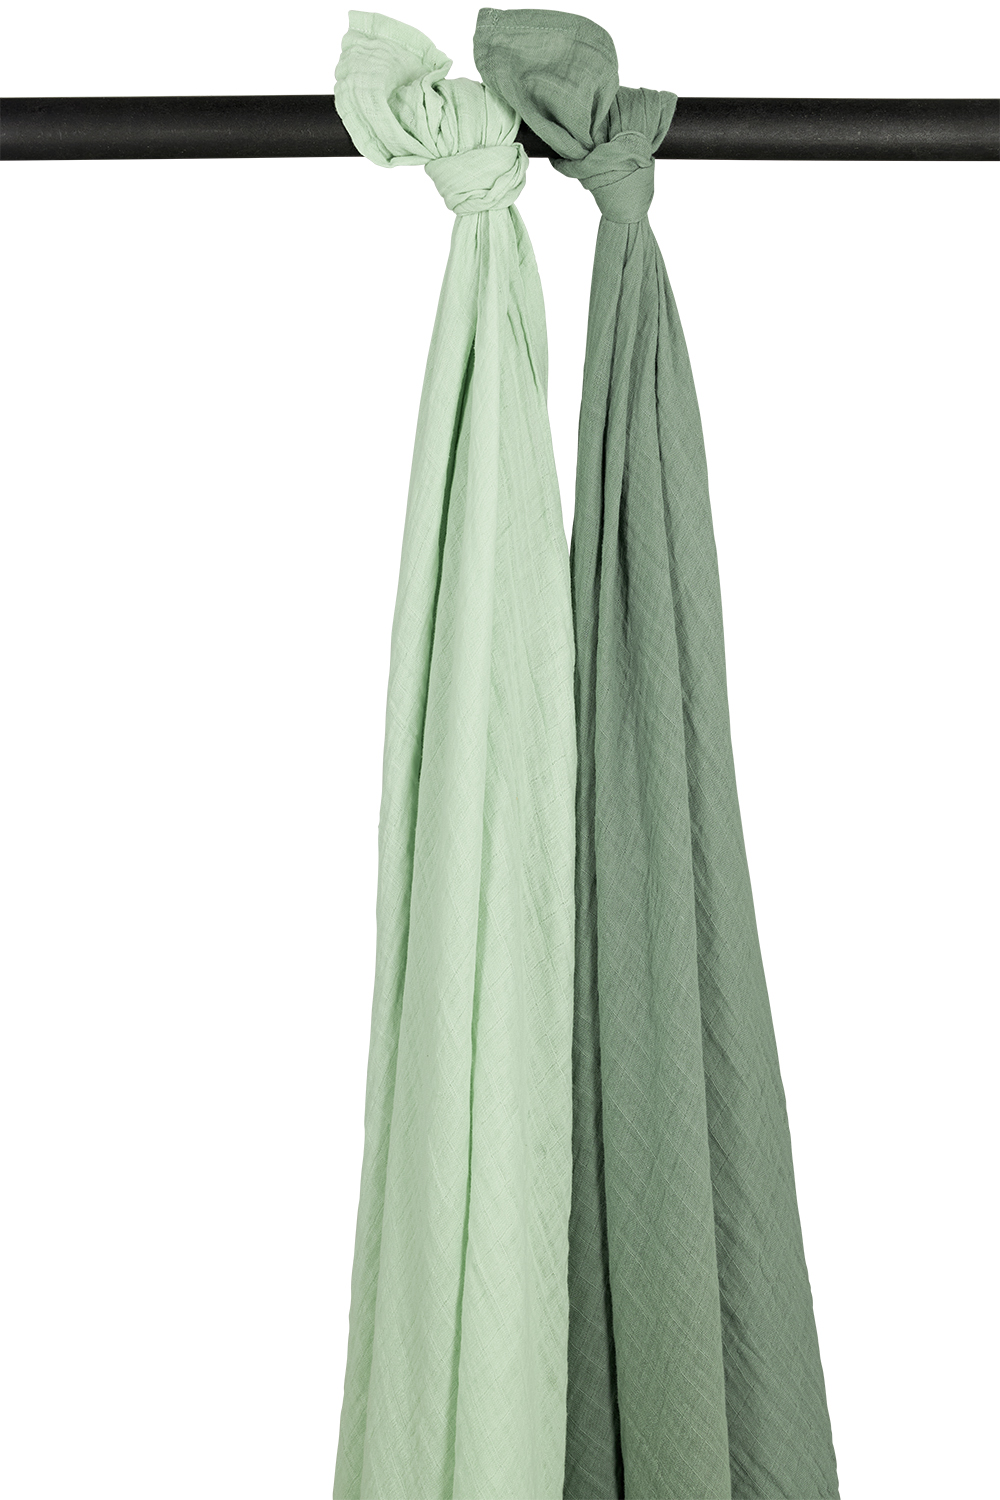 Swaddle 2-pack pre-washed hydrofiel Uni - soft green/forest green - 120x120cm